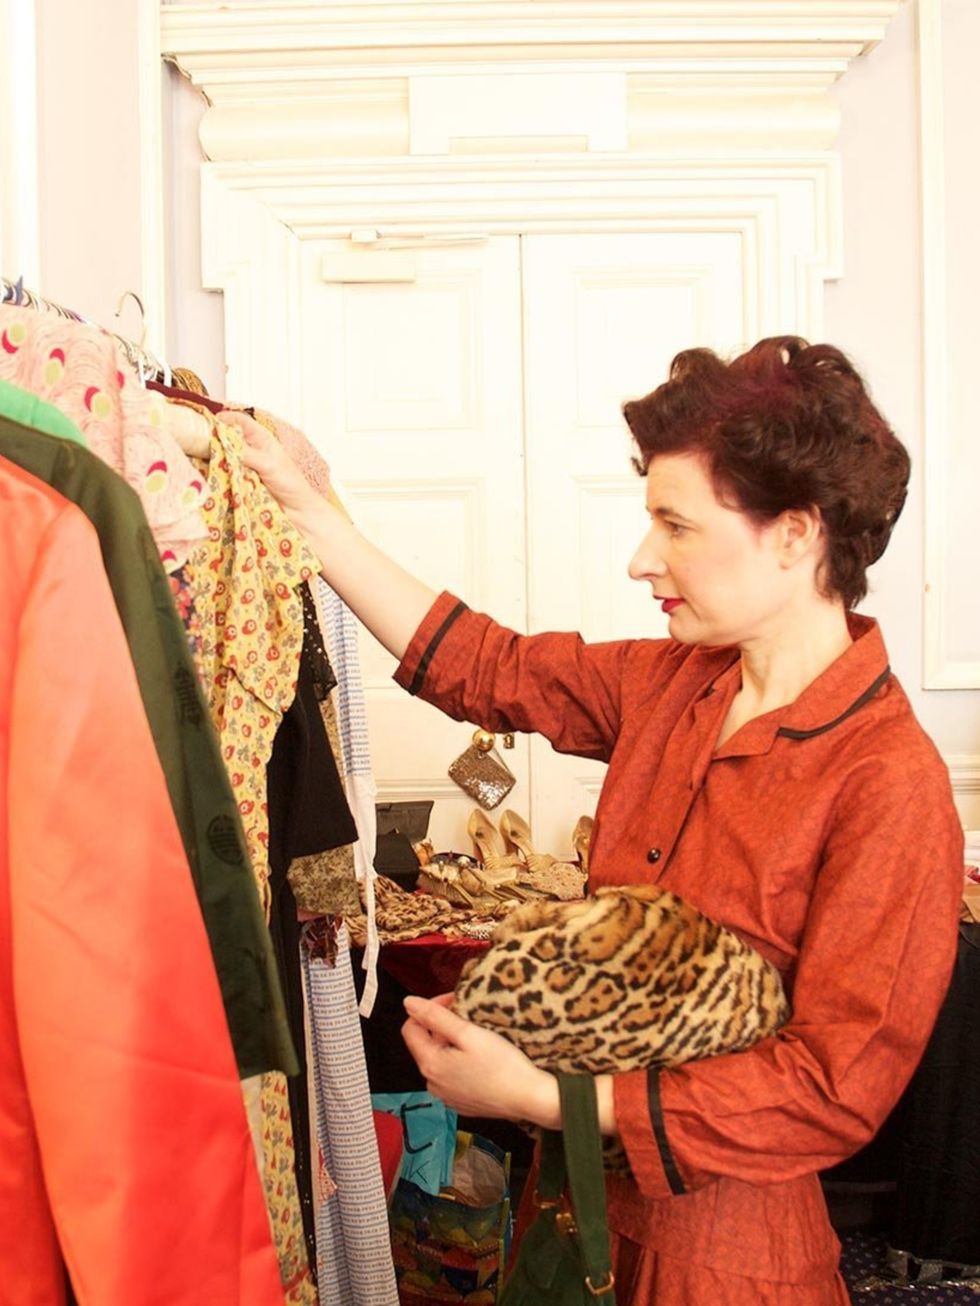 &lt;p&gt;&lt;strong&gt;SHOP: Frock Me!&lt;/strong&gt;&lt;/p&gt;&lt;p&gt;This Sunday sees Kings Road&rsquo;s Chelsea Town Hall turned into a one-stop vintage Aladdin&rsquo;s cave for the tenth anniversary of its Frock Me! fashion fair.&lt;/p&gt;&lt;p&gt;Wi